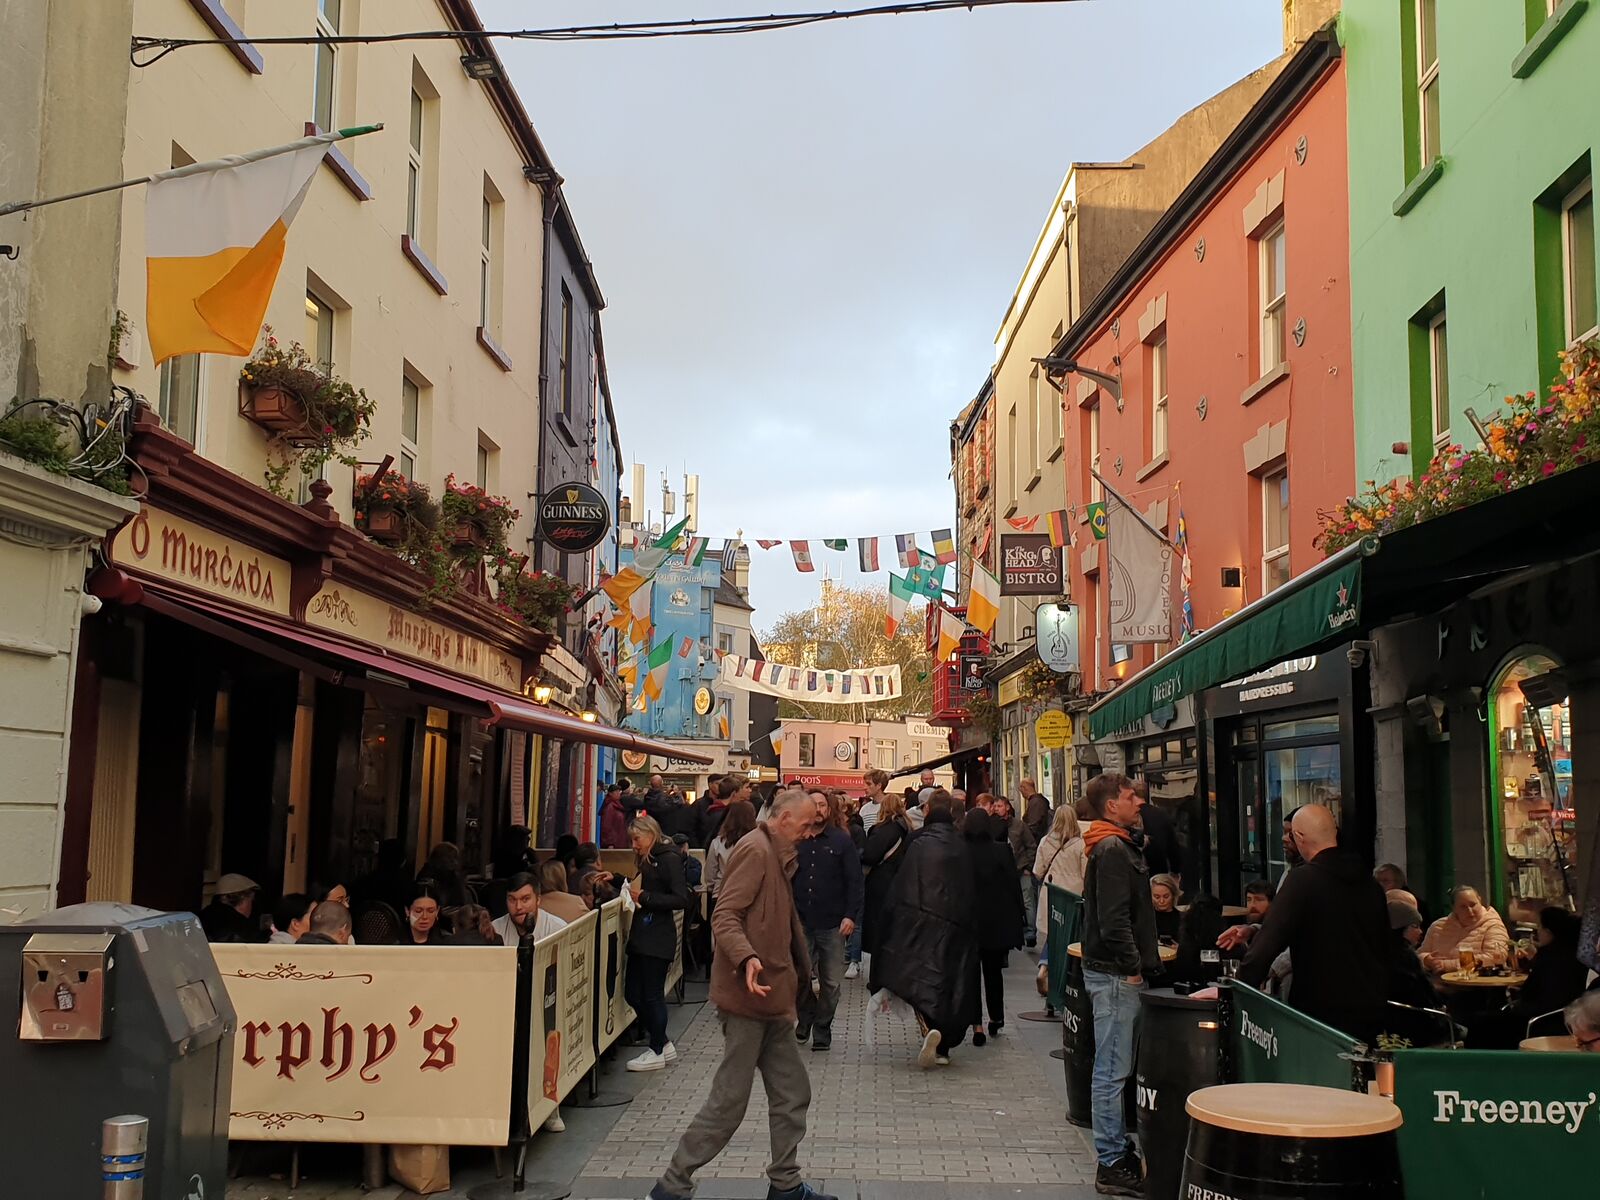 City of Galway